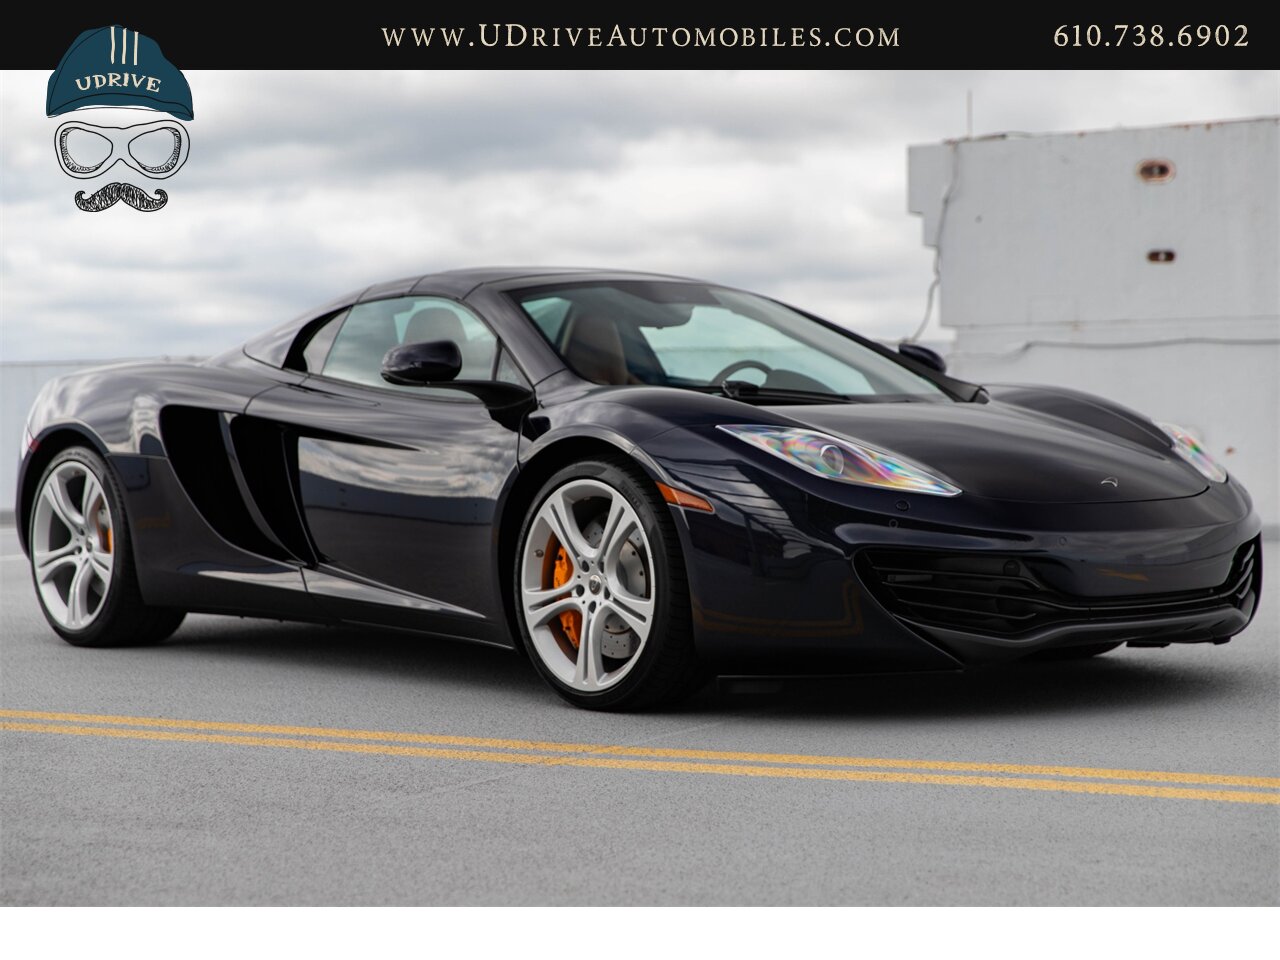 2013 McLaren MP4-12C Spider 1 Owner 6k Miles Carbon Fiber Full Leather  Sapphire Black over Natural Tan Leather - Photo 14 - West Chester, PA 19382